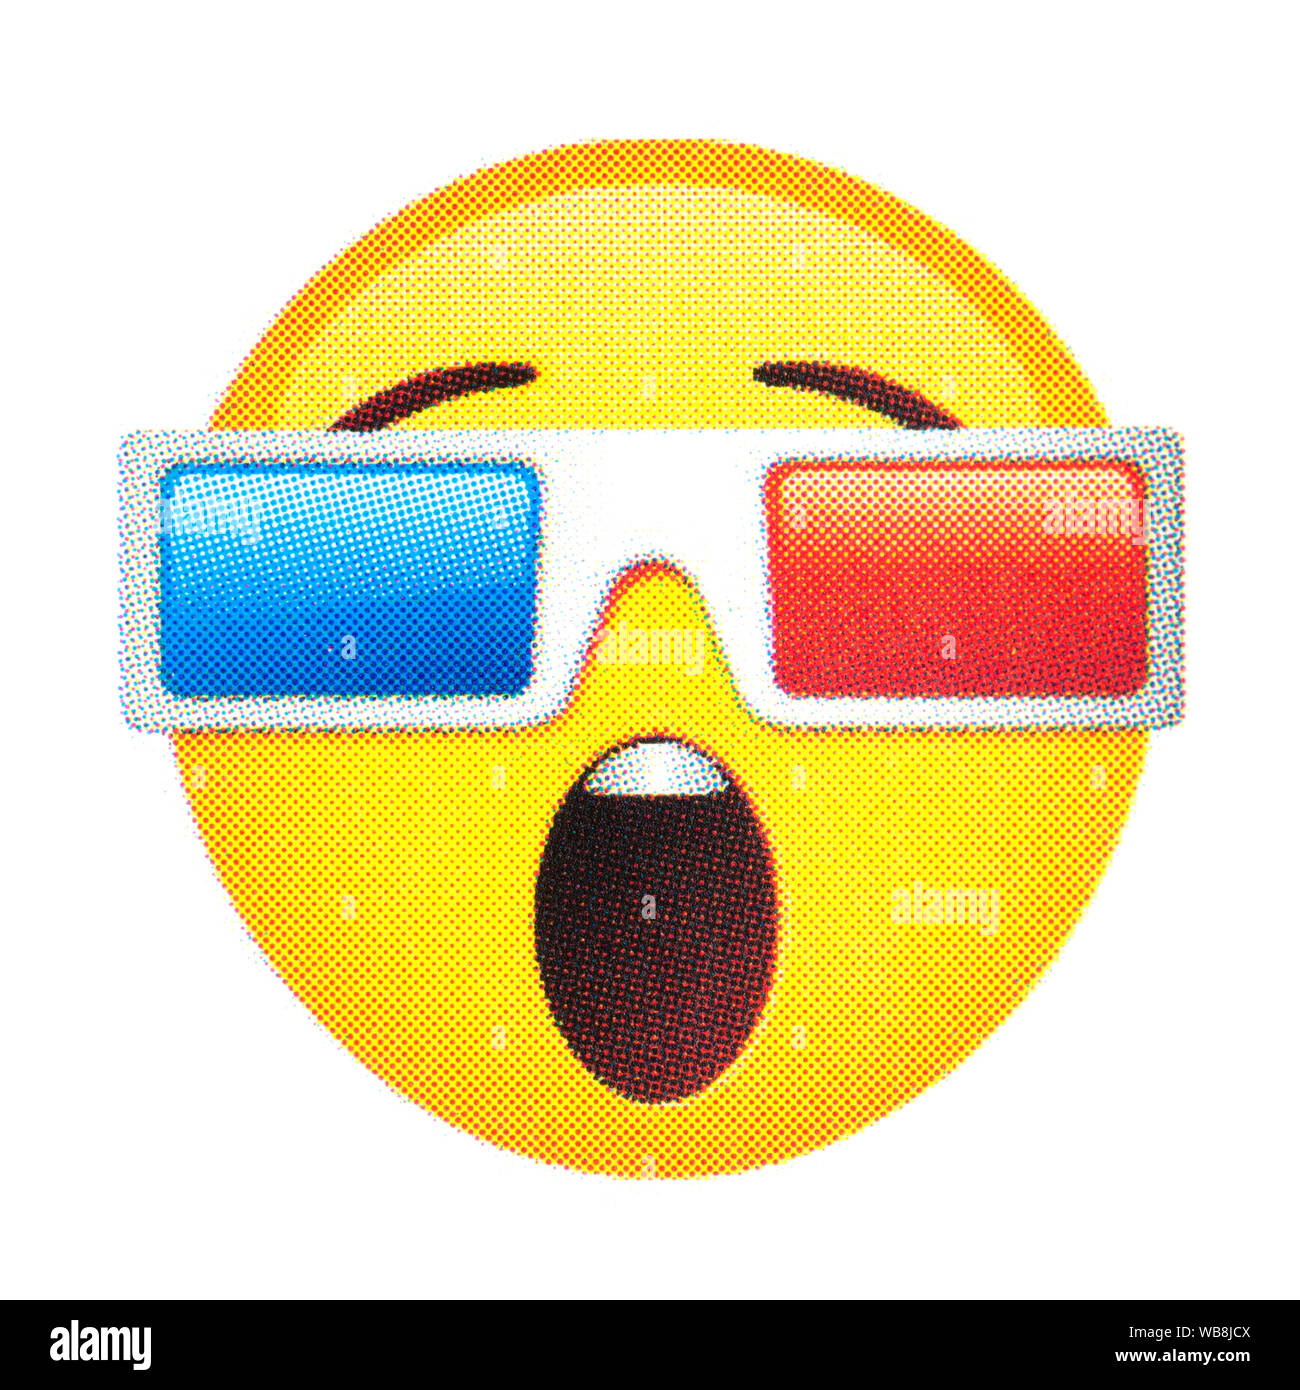 Astonished face with sunglasses emoticon Stock Photo